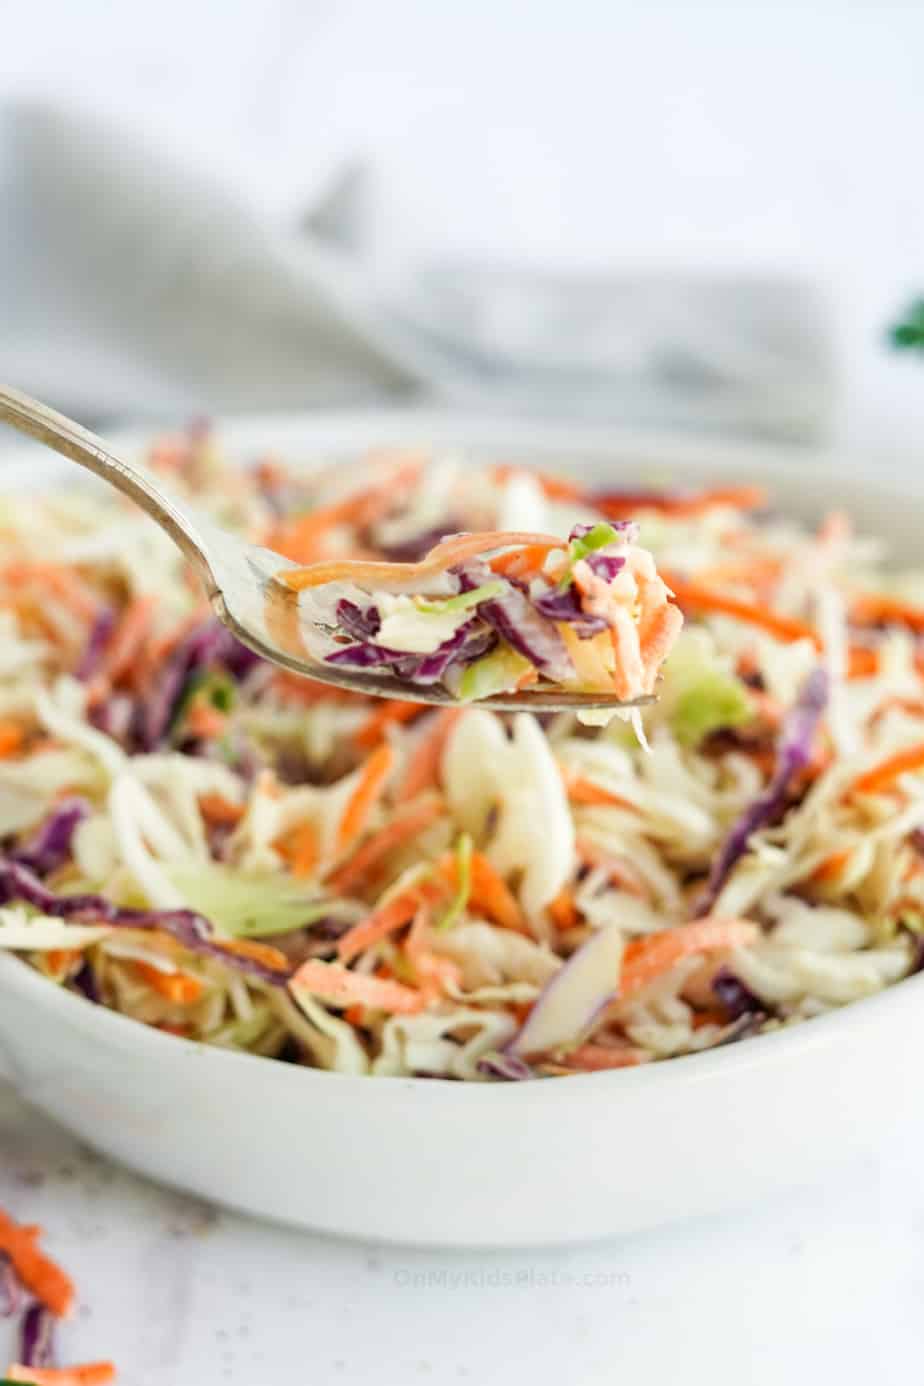 Coleslaw in a bowl being lifted up on a fork